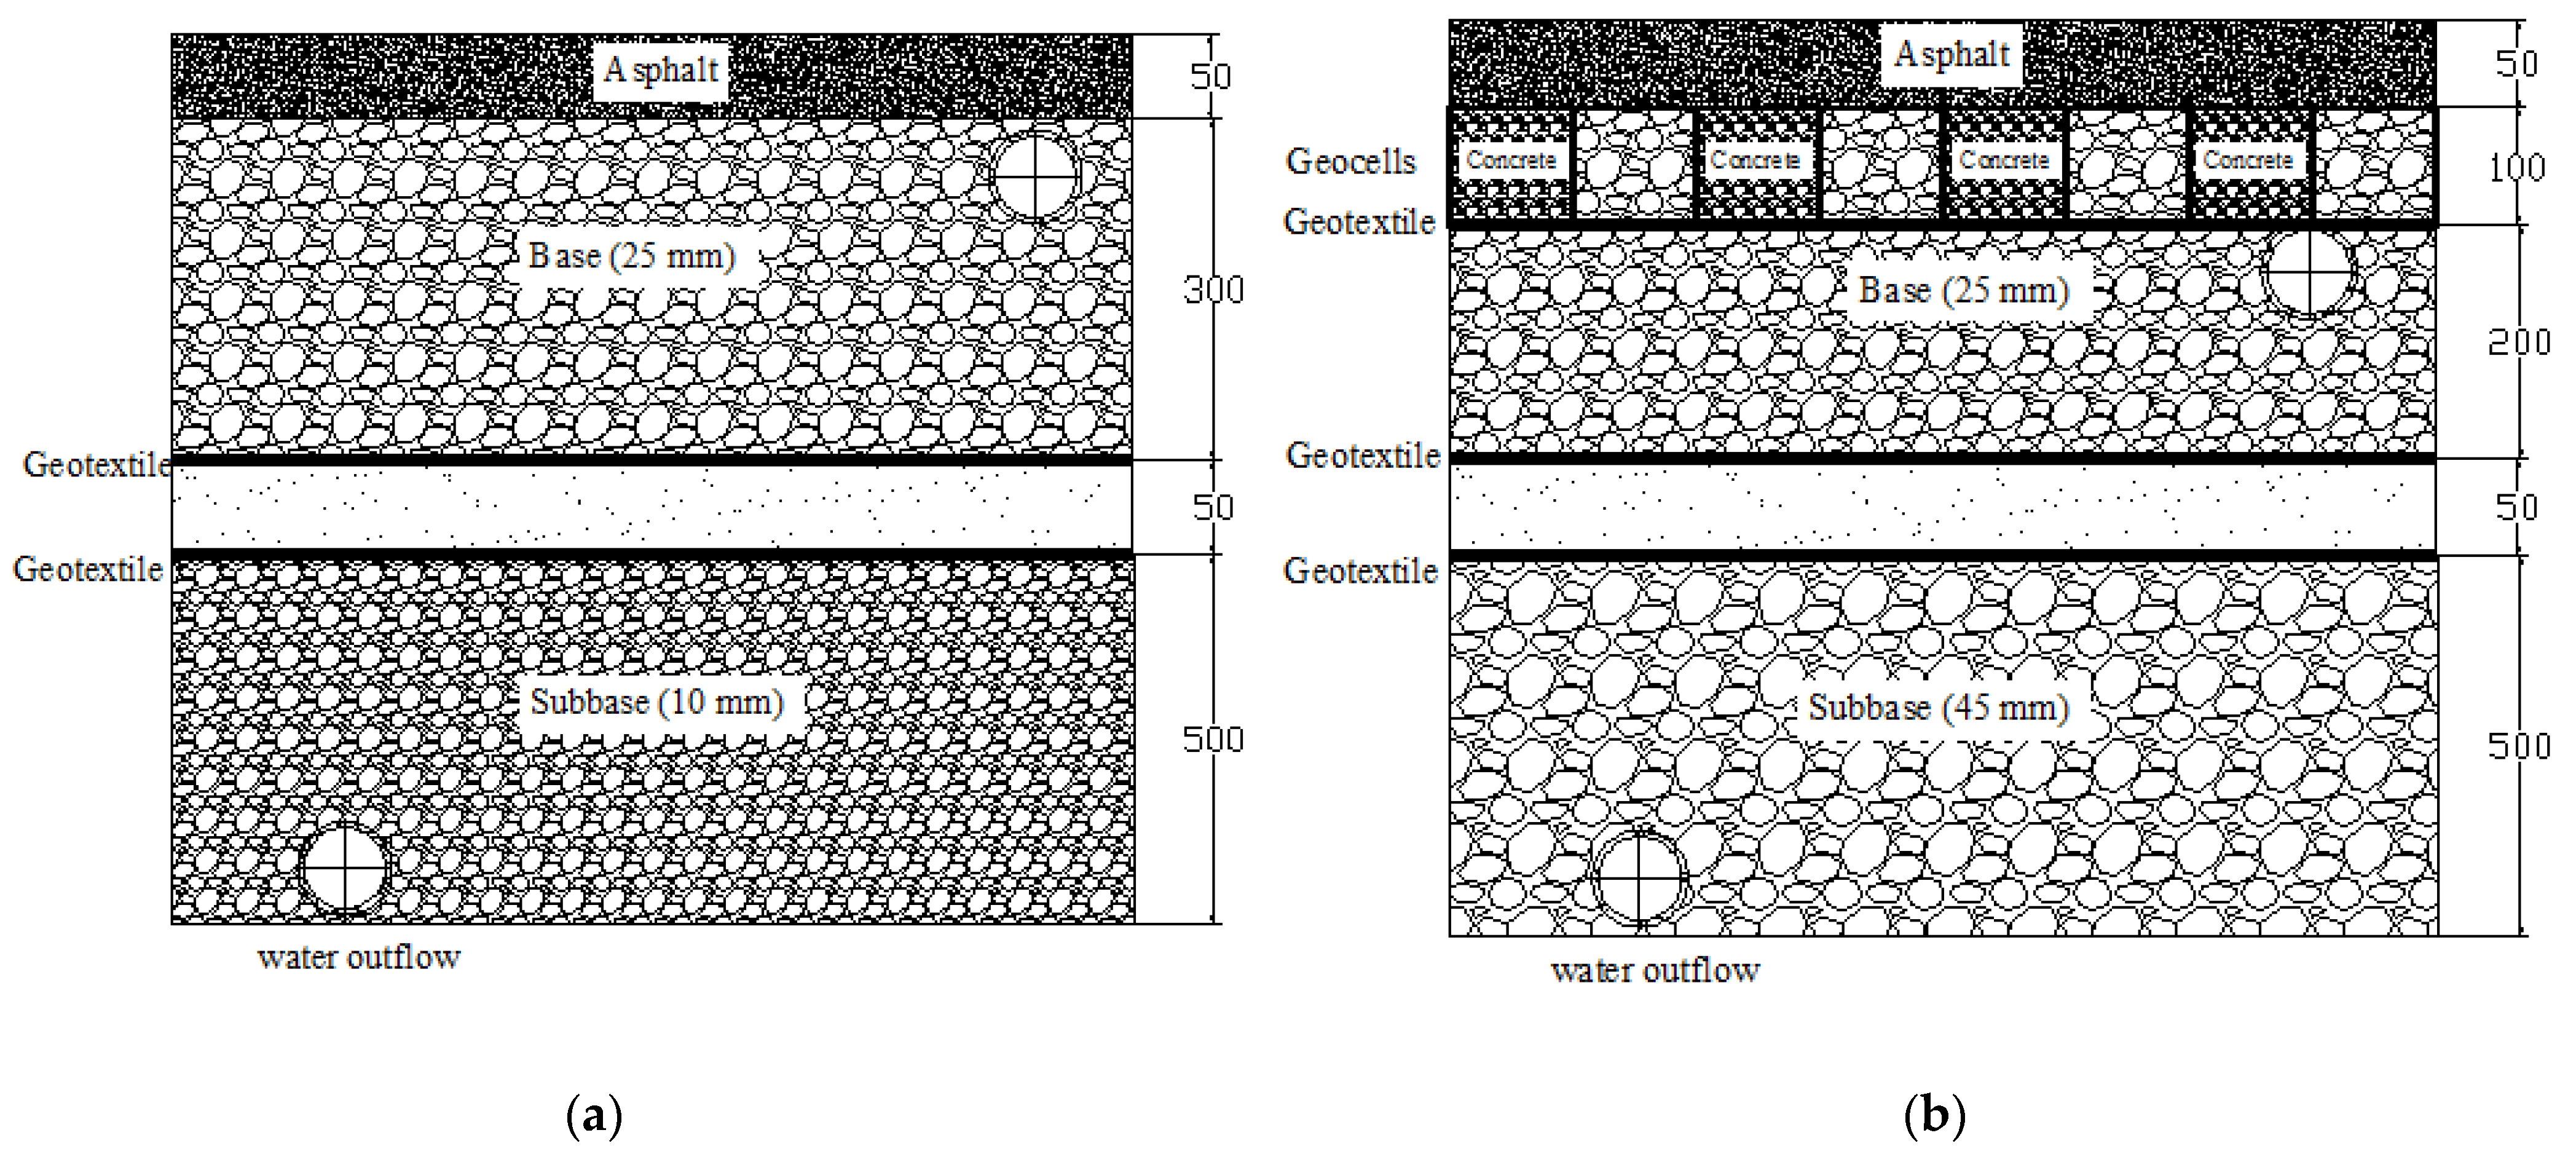 Schematic of experimental setup for combined permeable pavements